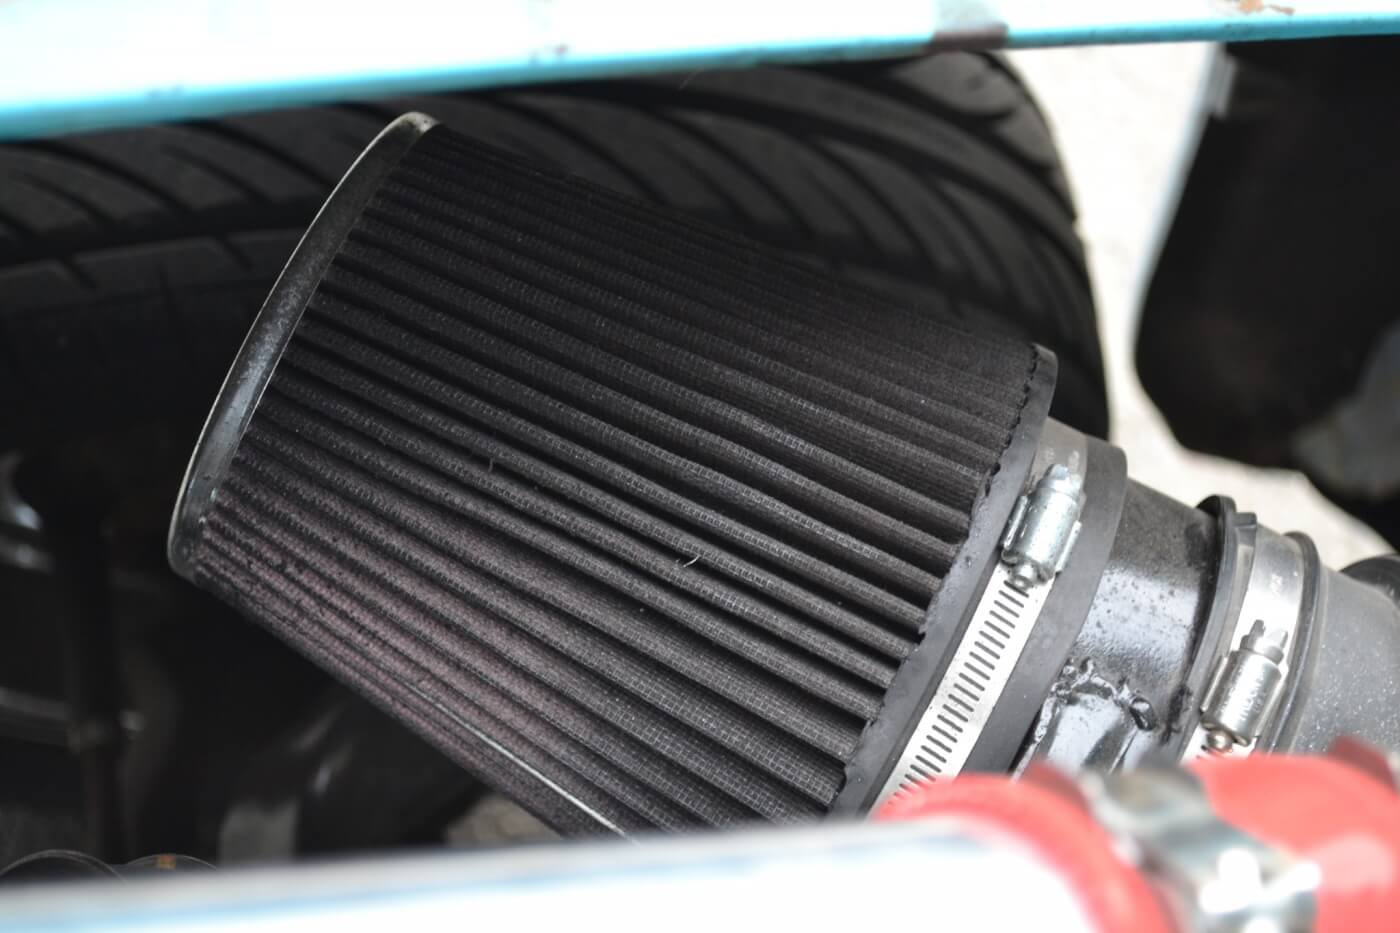 A universal air filter "of some sort" was another used item, which gets the job done as far as airflow into the turbo goes.